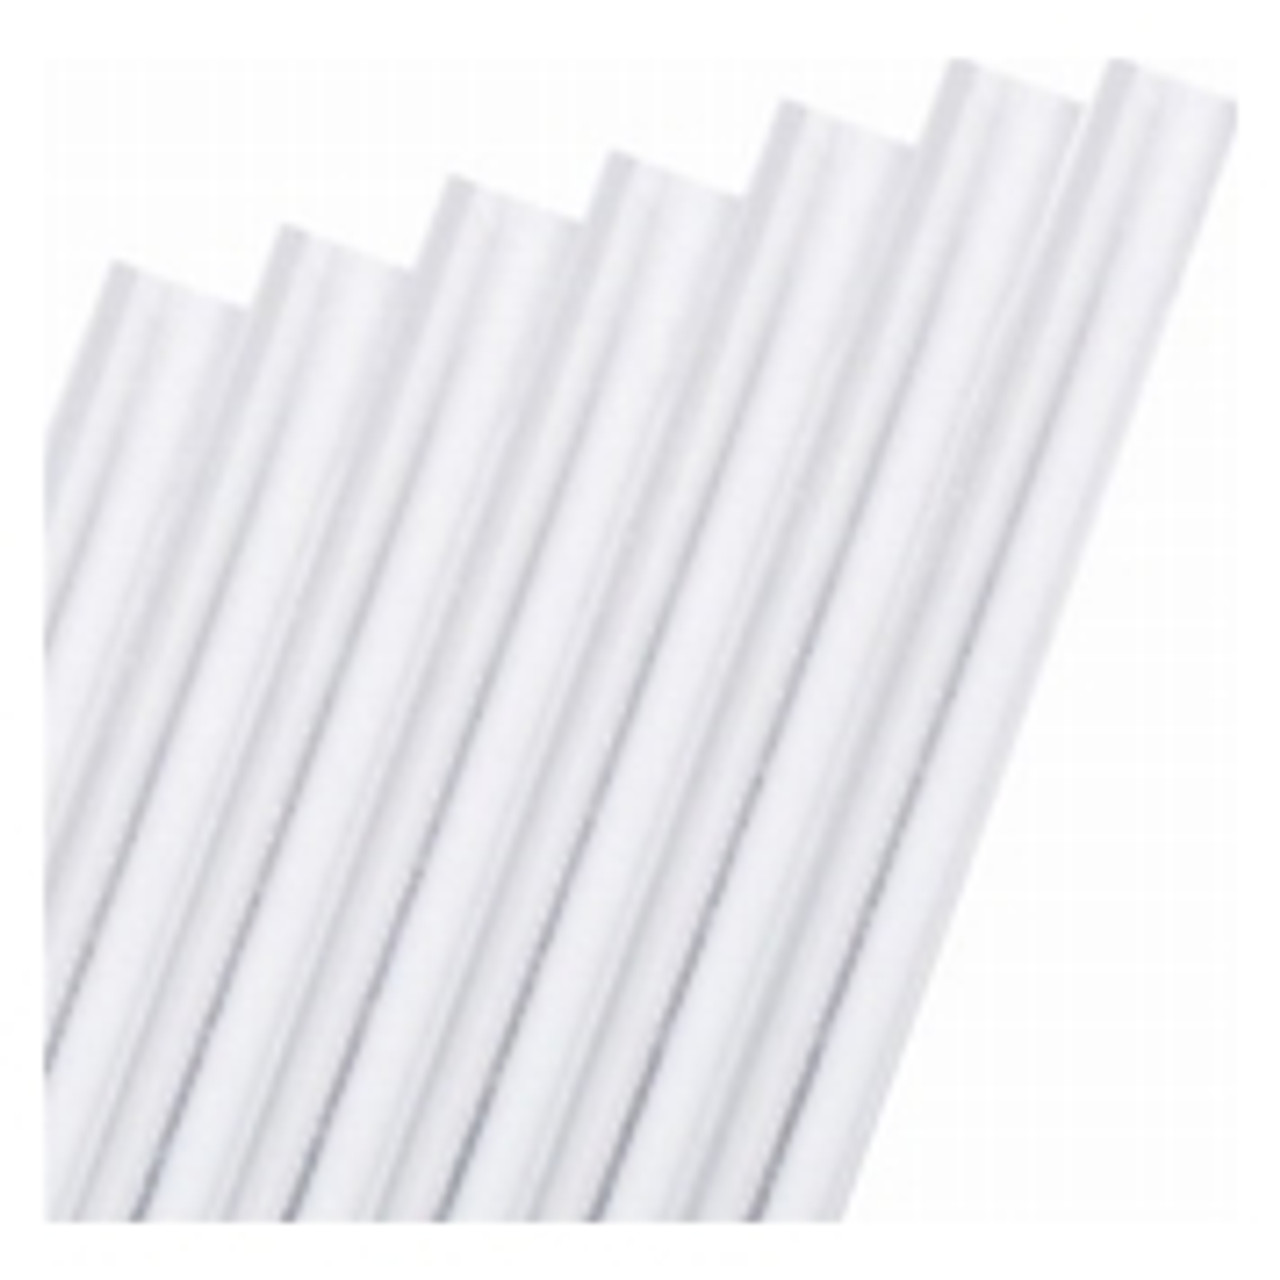 8"  9mm Clear Smoothie Straws Pk 200